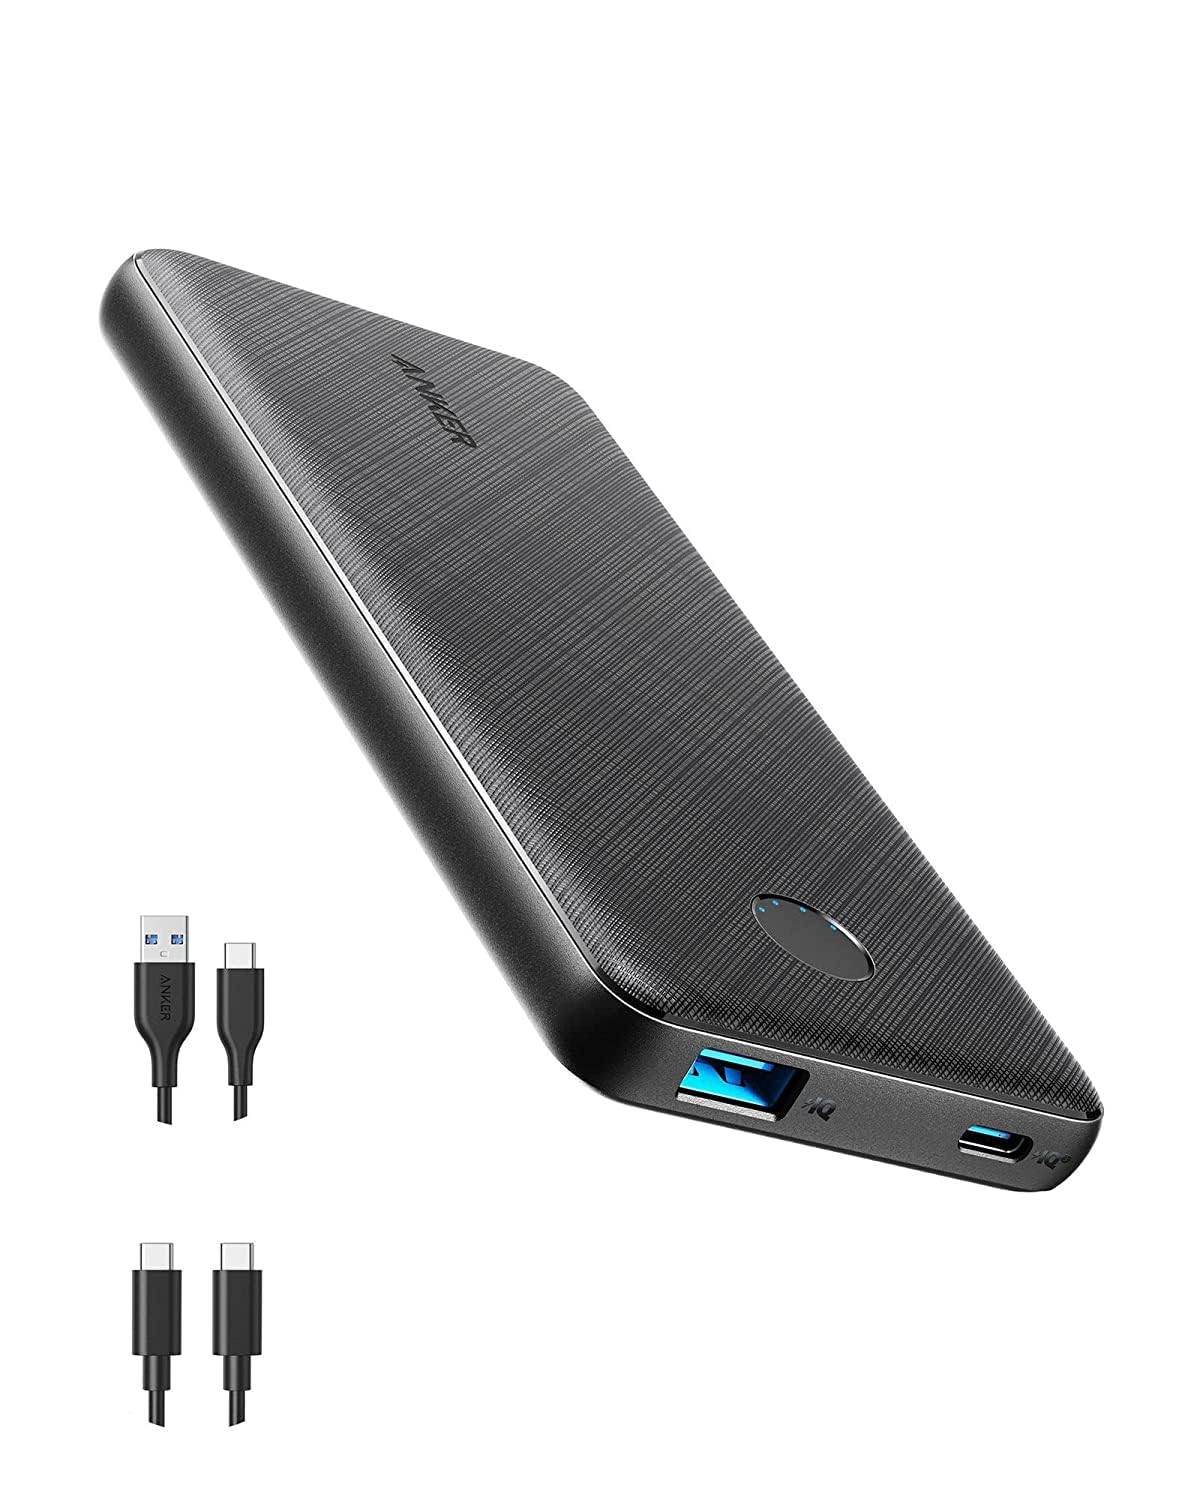 Anker 10000mAh 20W USB-C Portable Charger $20 +  Free Shipping w/ Prime or orders $35+